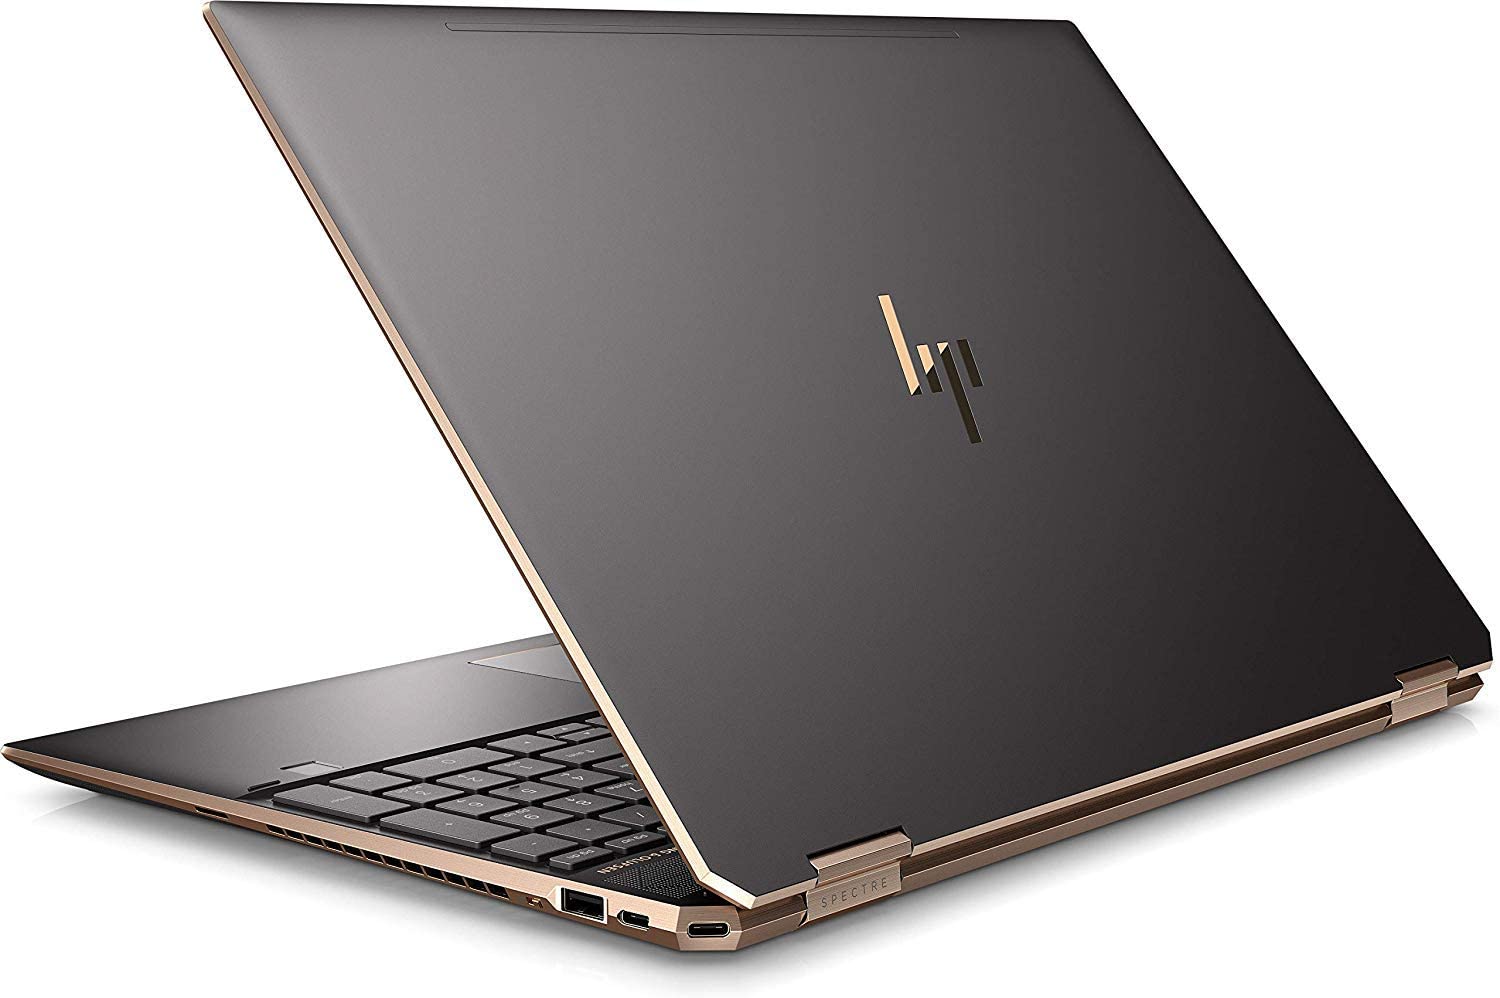 Newest HP Spectre x360 15t Touch AMOLED back angle